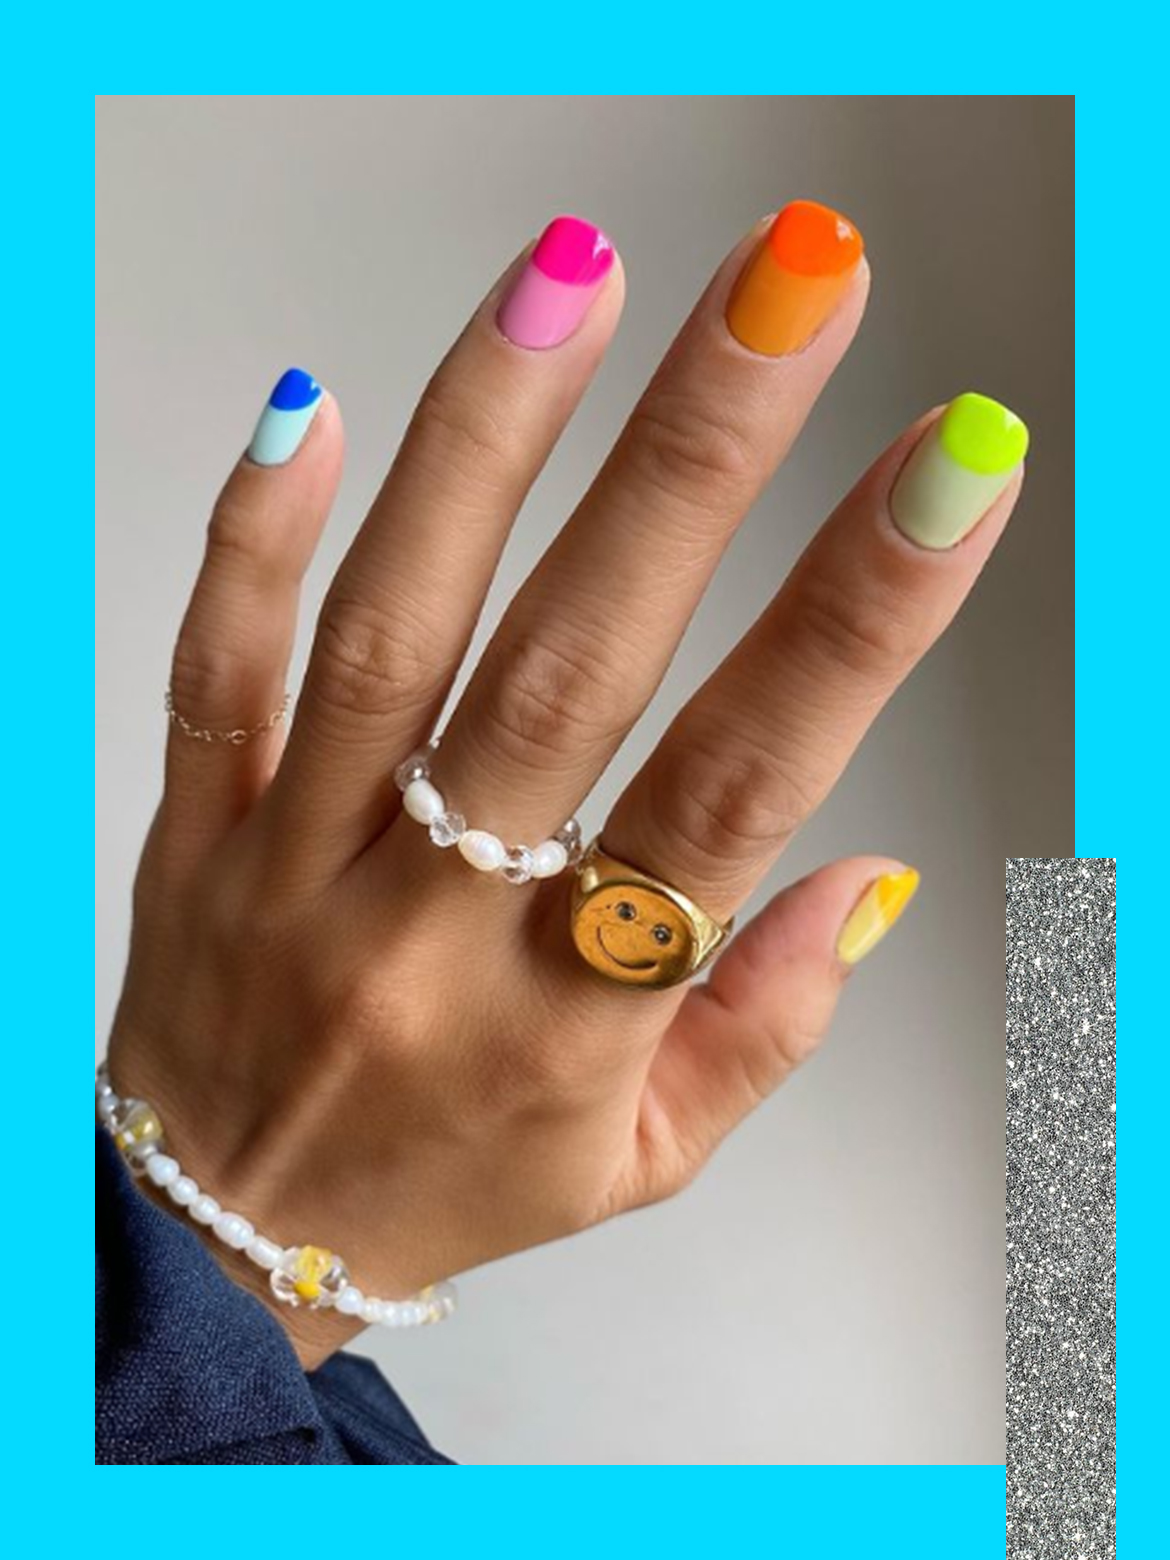 Bright Neon Manicure on Female Hands on the Background of Jeans. Nail Design.  Beauty Hands. Stock Photo - Image of bright, fashionable: 154451440